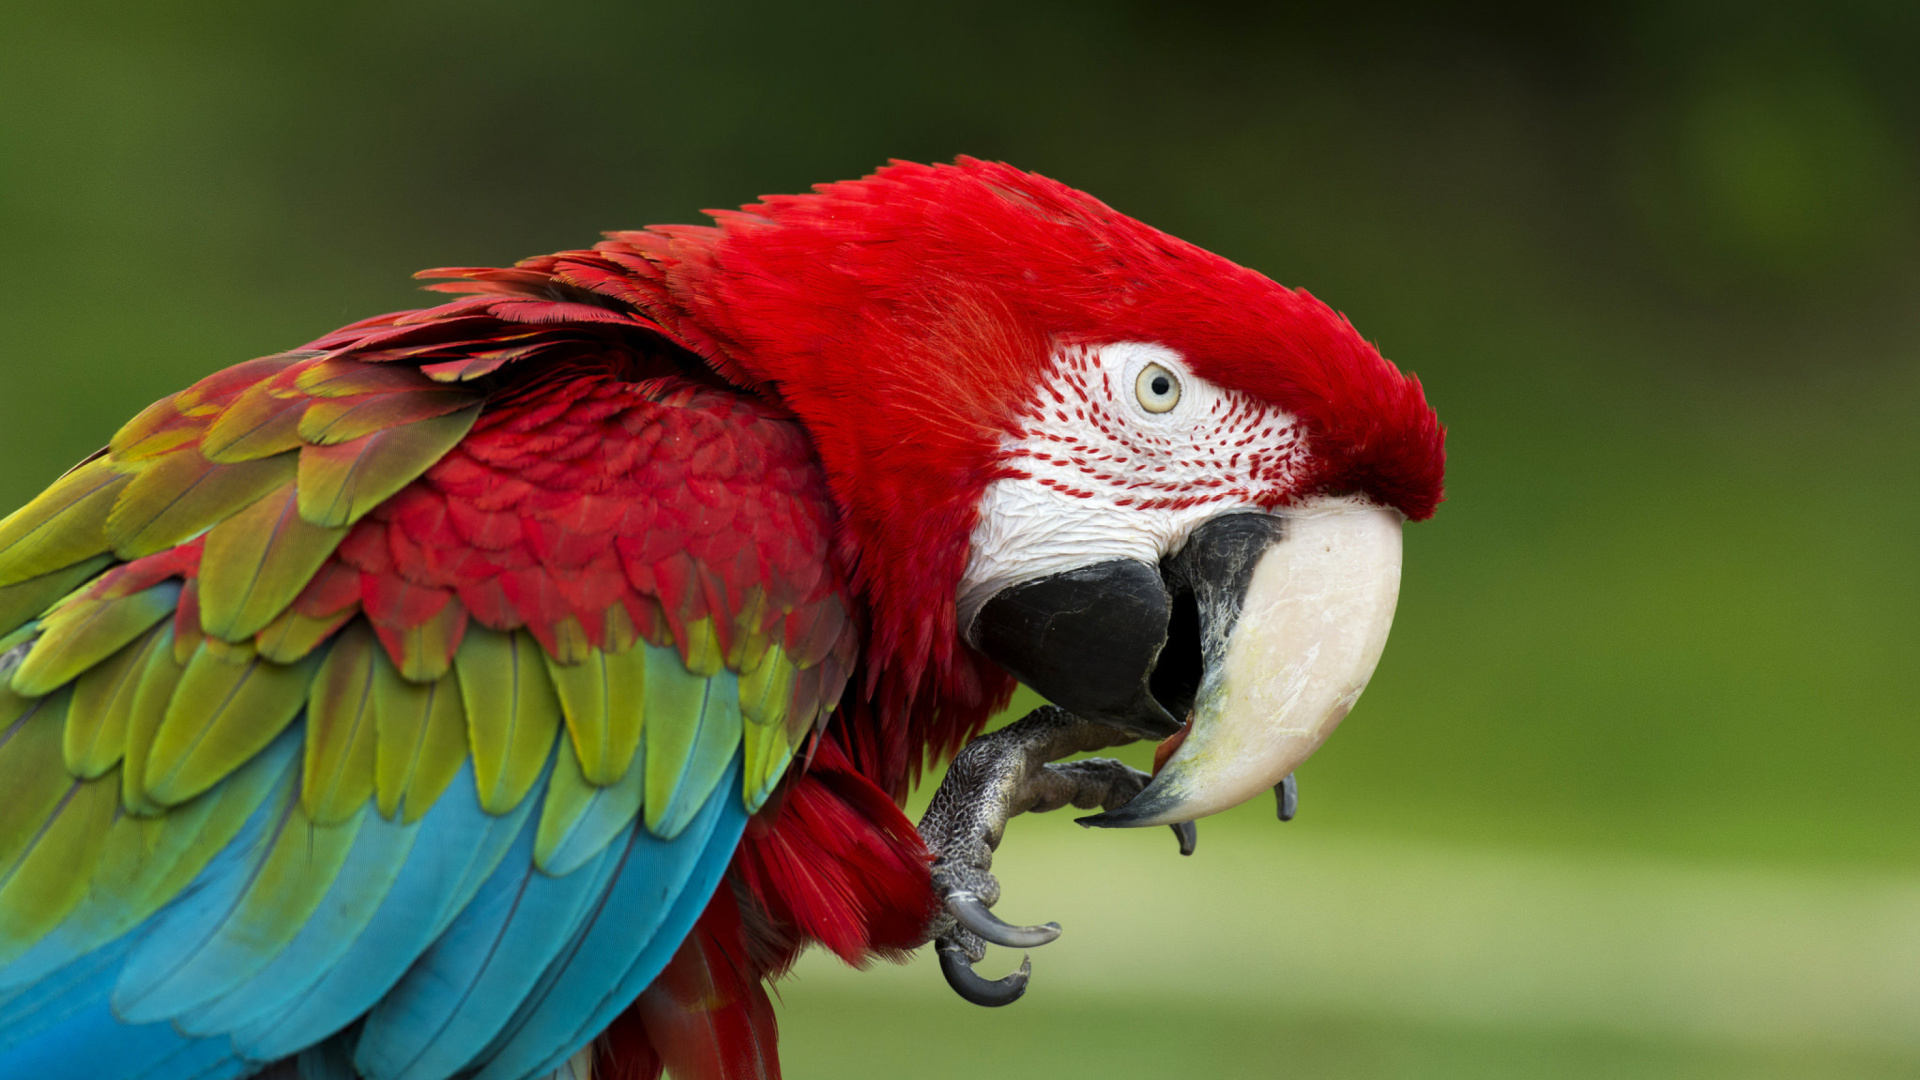 Green winged macaw wallpaper 1920x1080